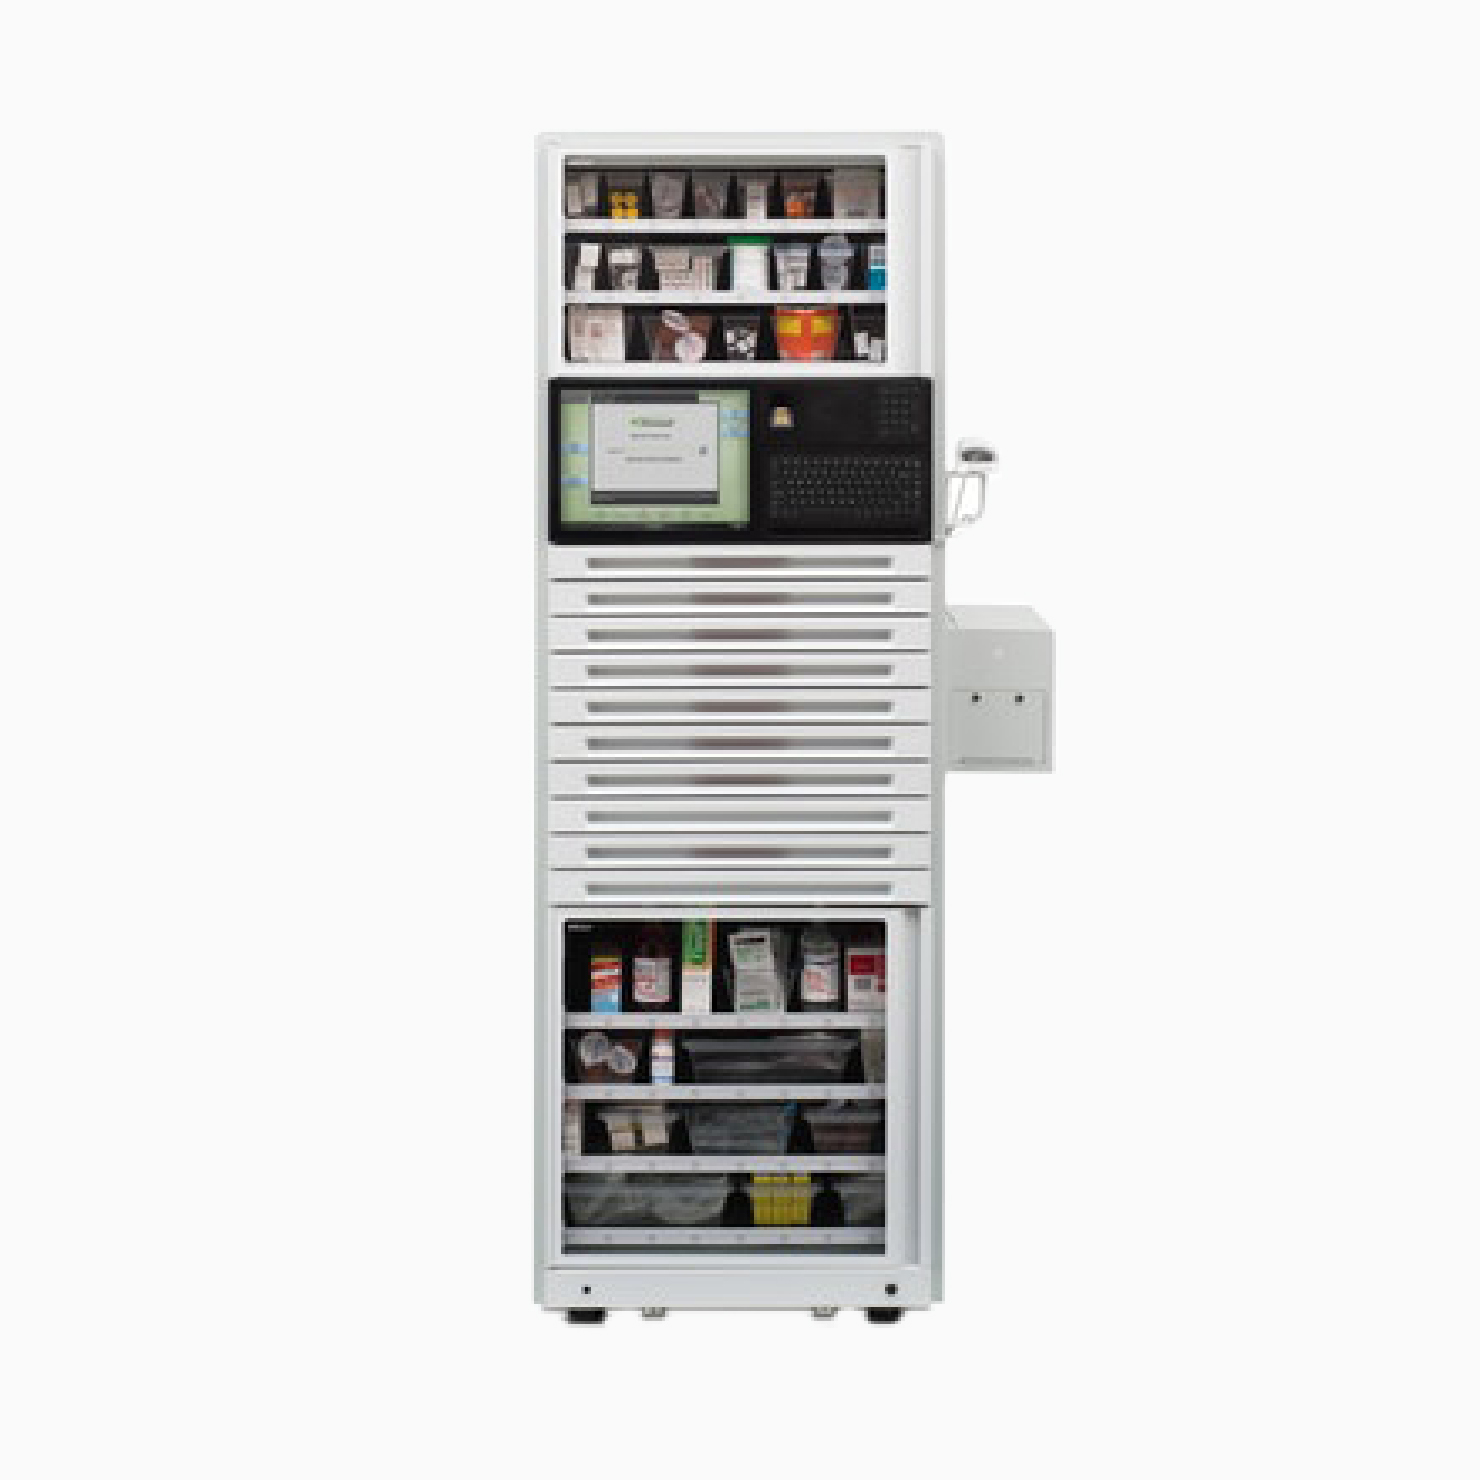 PoC002 XT Automated Dispensing Cabinet